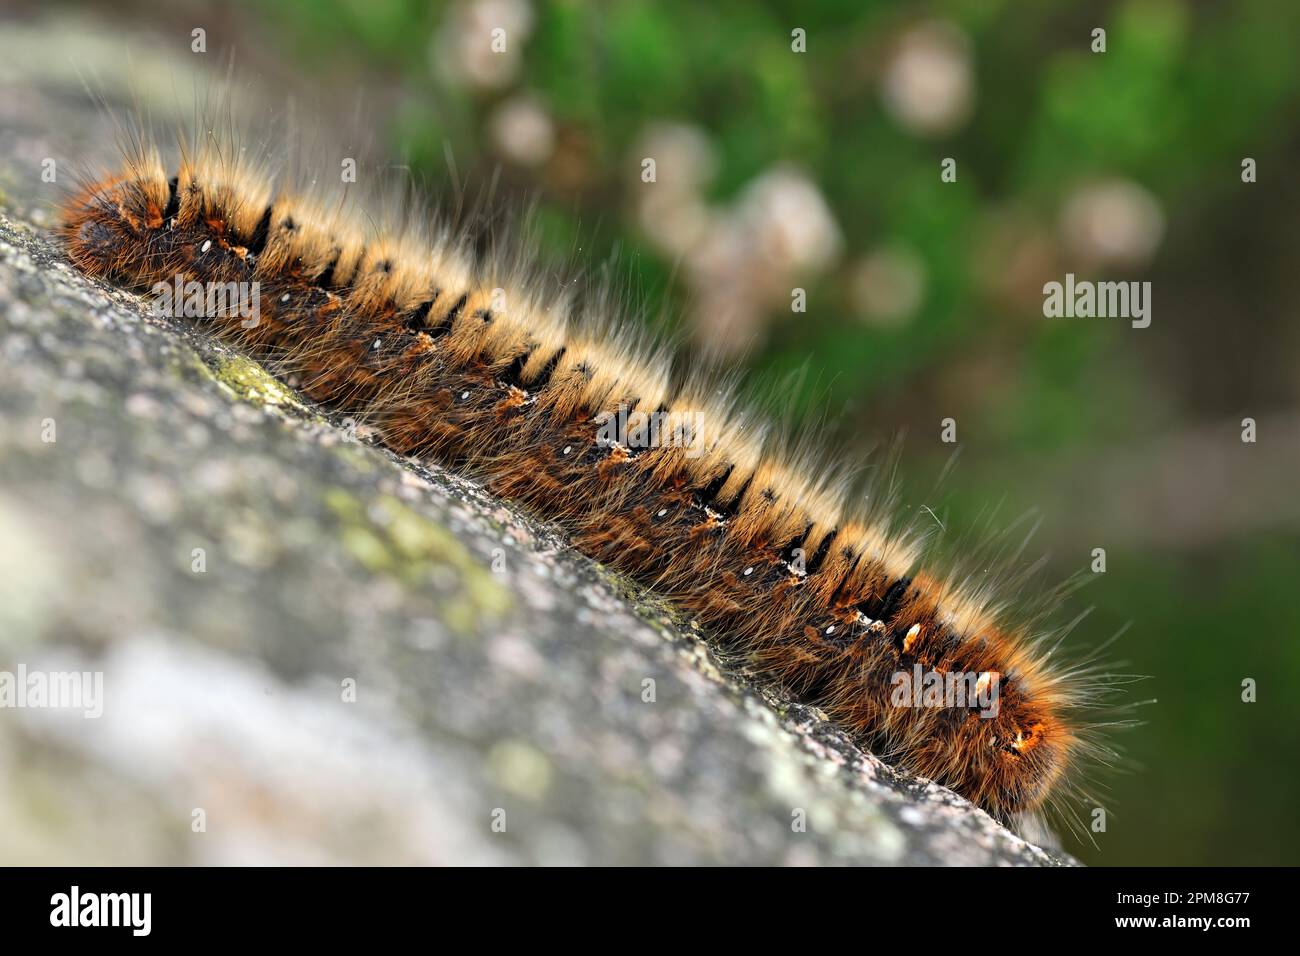 Northern Eggar Moth (Lasiocampa quercus) catterpillar on lichen-covered boulder, Cheviot Hills, Northumberland National Park, England, May 2016 Stock Photo